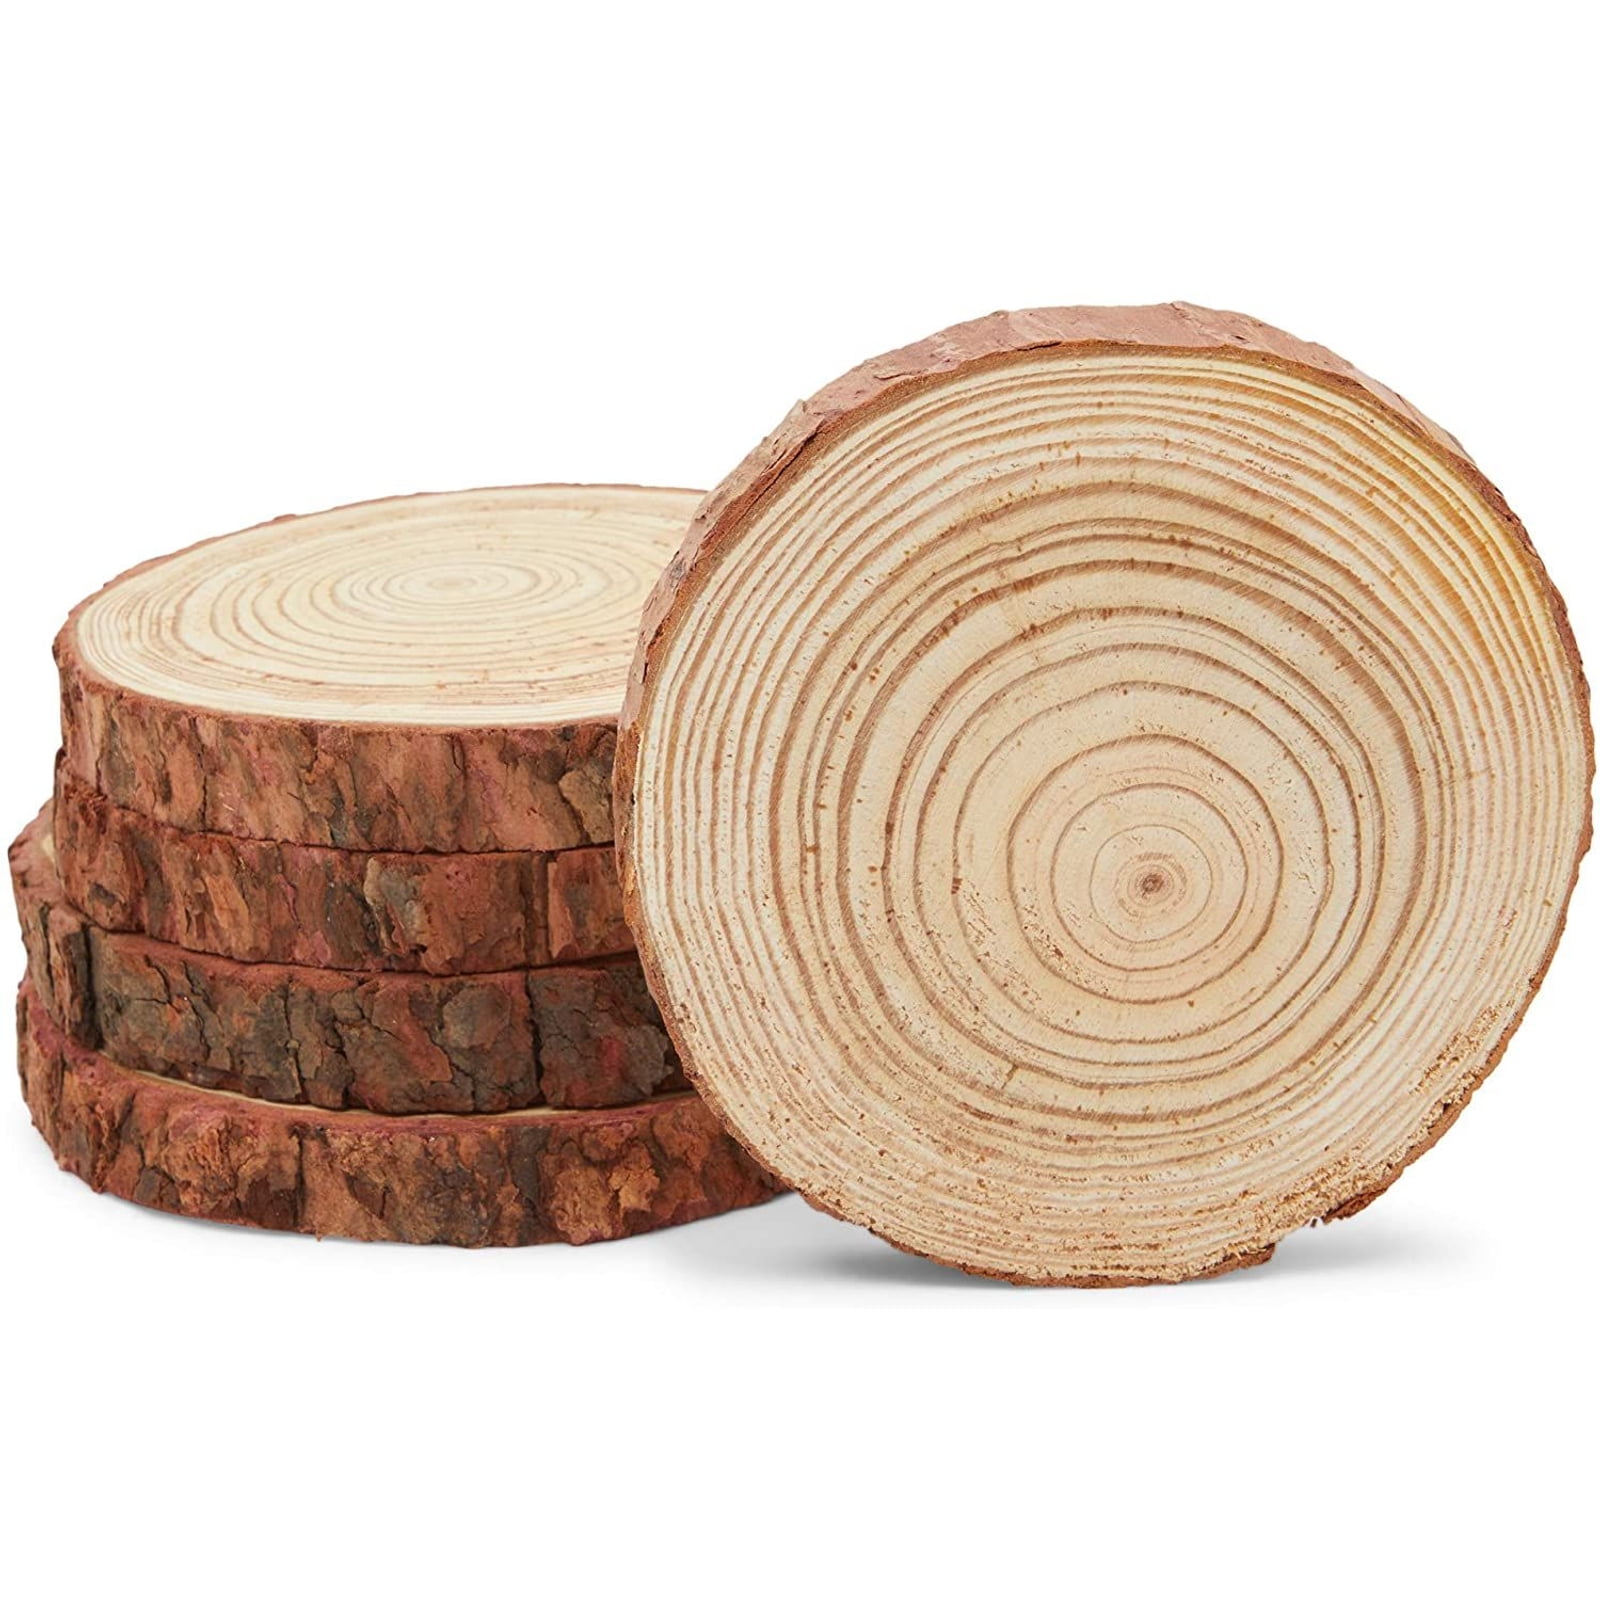 Round Pinewood Slabs Natural Wood Slices 6 to 7 inch Weathered Log Disc Rustic Tree Bark Slice Outdoor Country Barn Wedding Table Centerpiece, Pack of 6